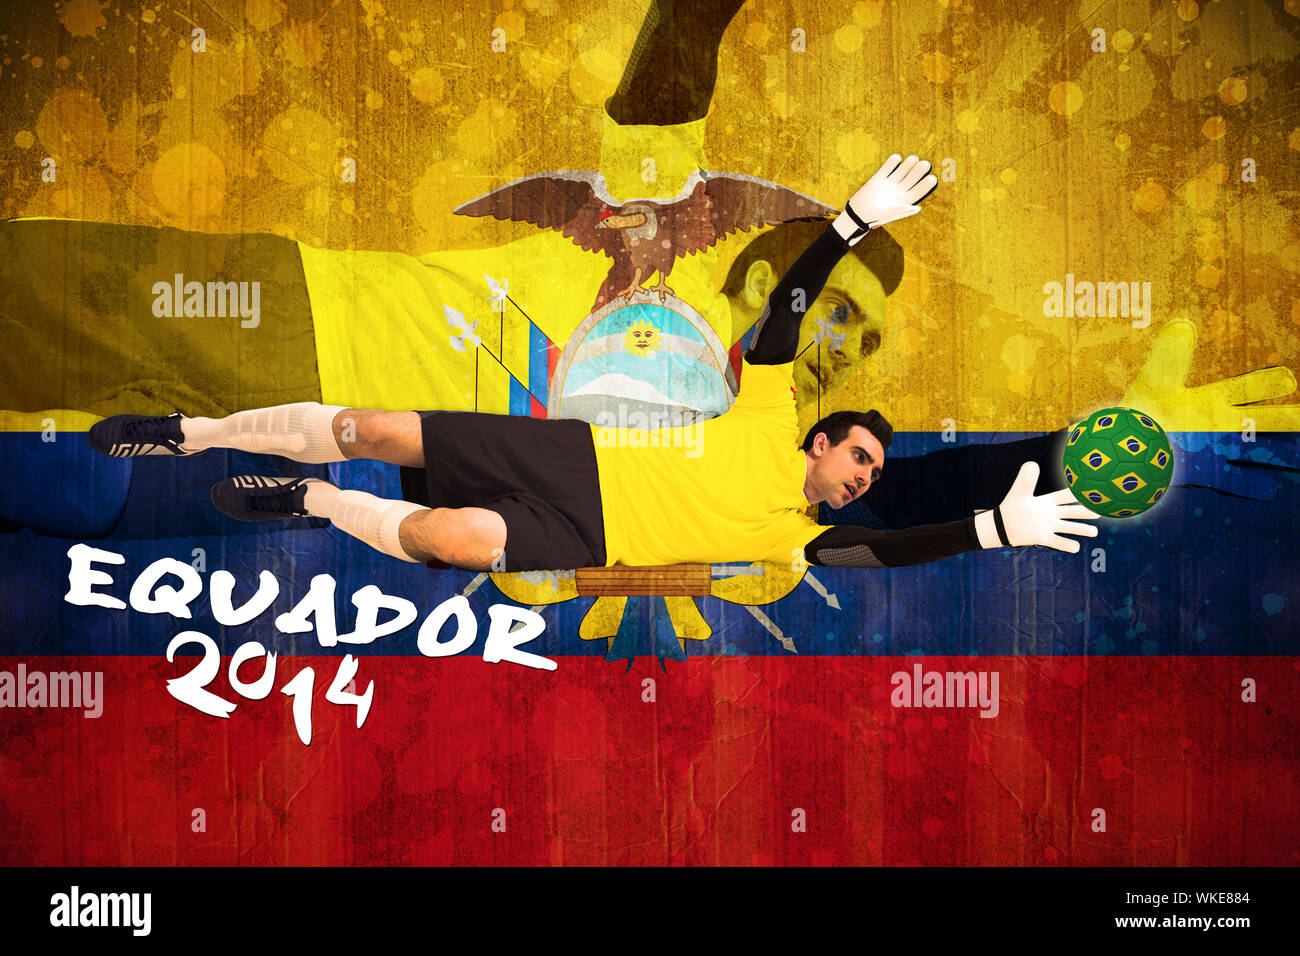 Goalkeeper in yellow making a save against ecuador flag in grunge effect Stock Photo